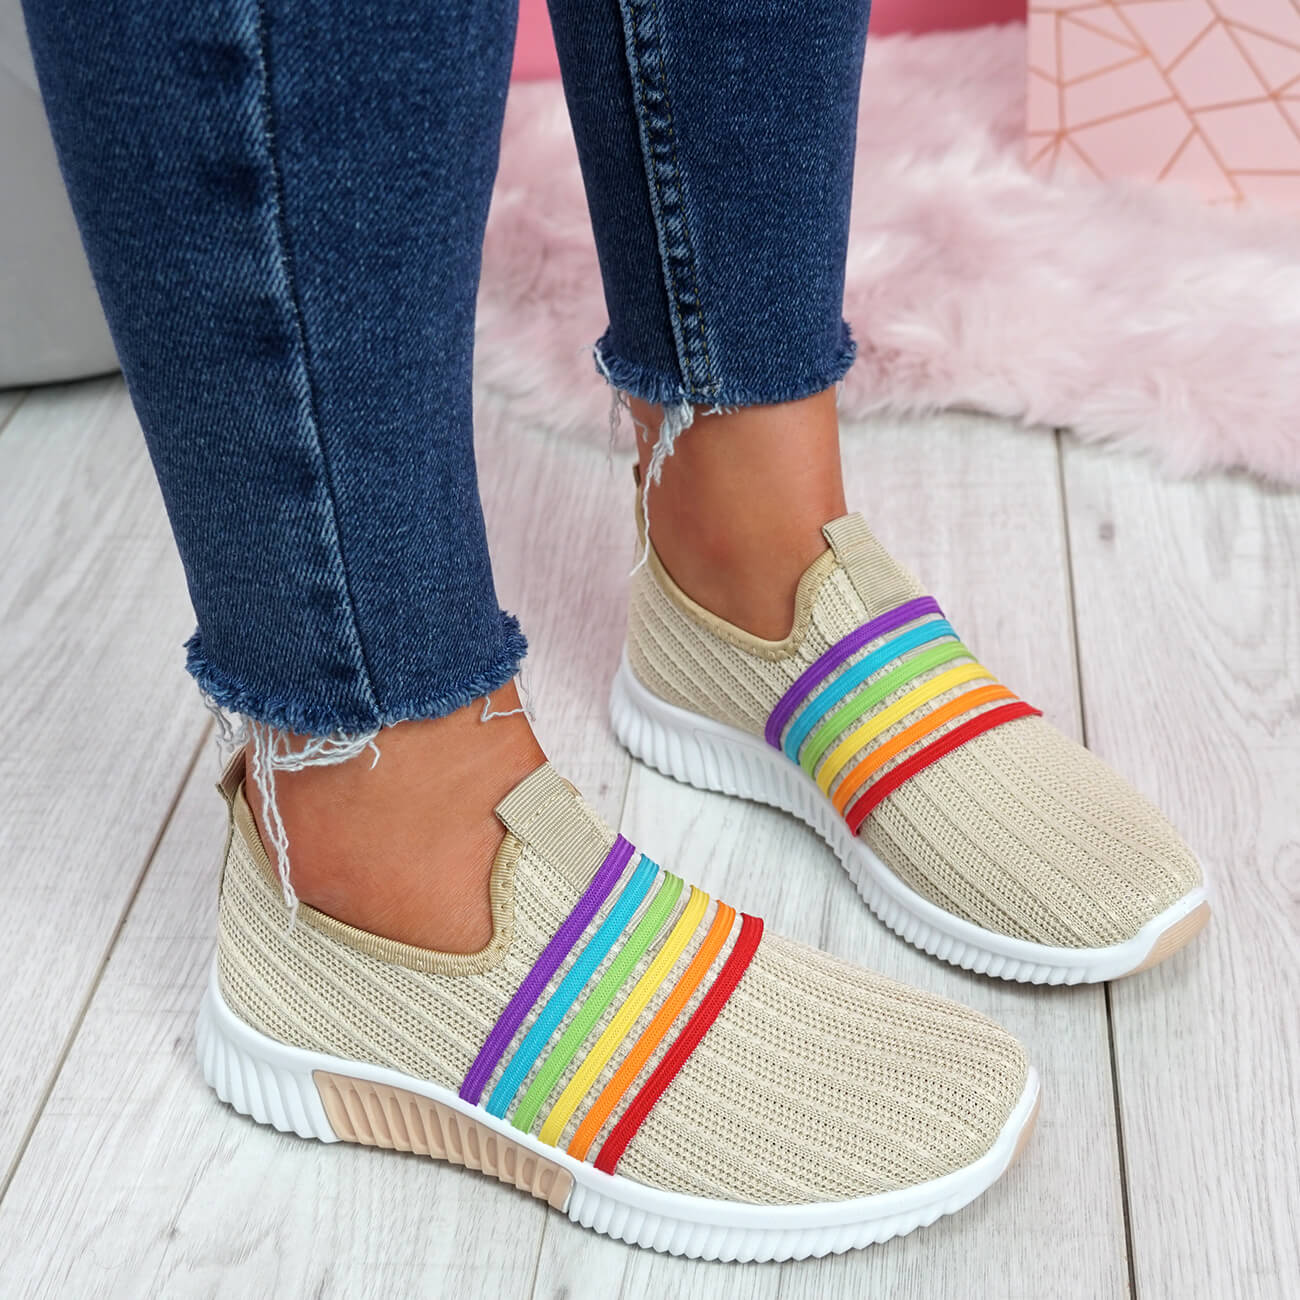 WOMENS LADIES SLIP ON RAINBOW SIZE TRAINERS PARTY SHOES HEEL WOMEN KNIT